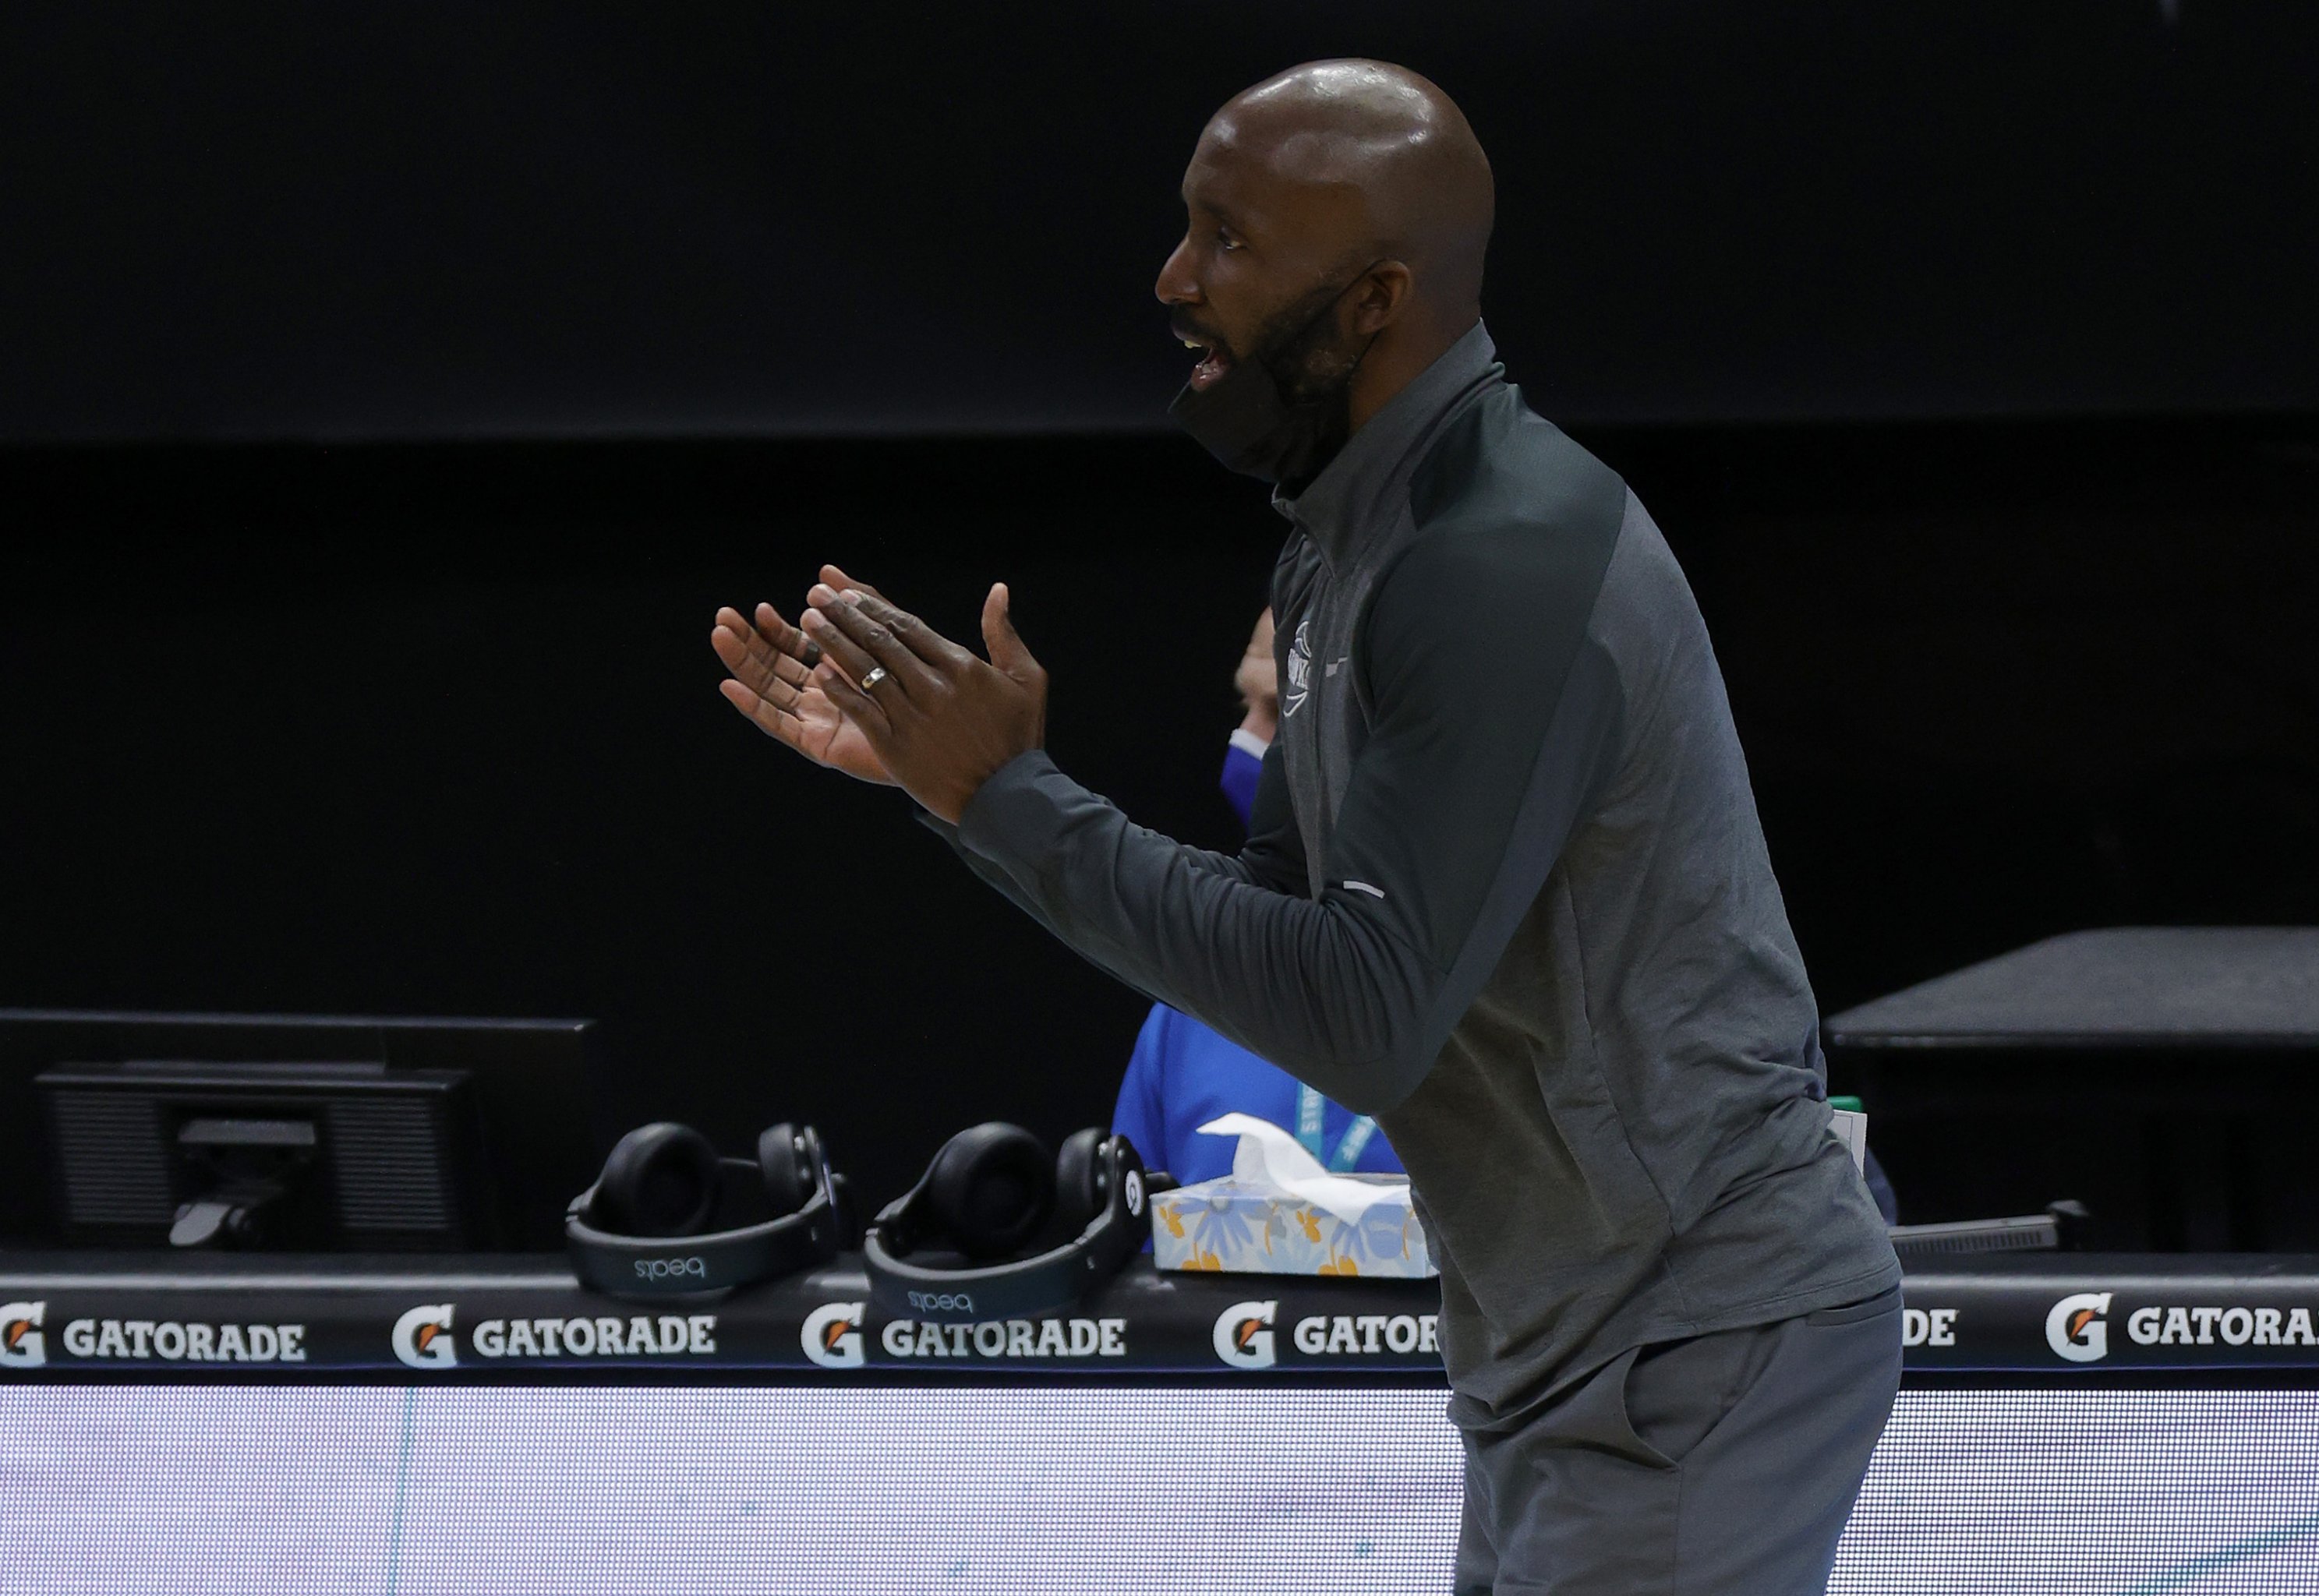 Official: Nets hire David Vanterpool as assistant coach, replacing Ime  Udoka - NetsDaily